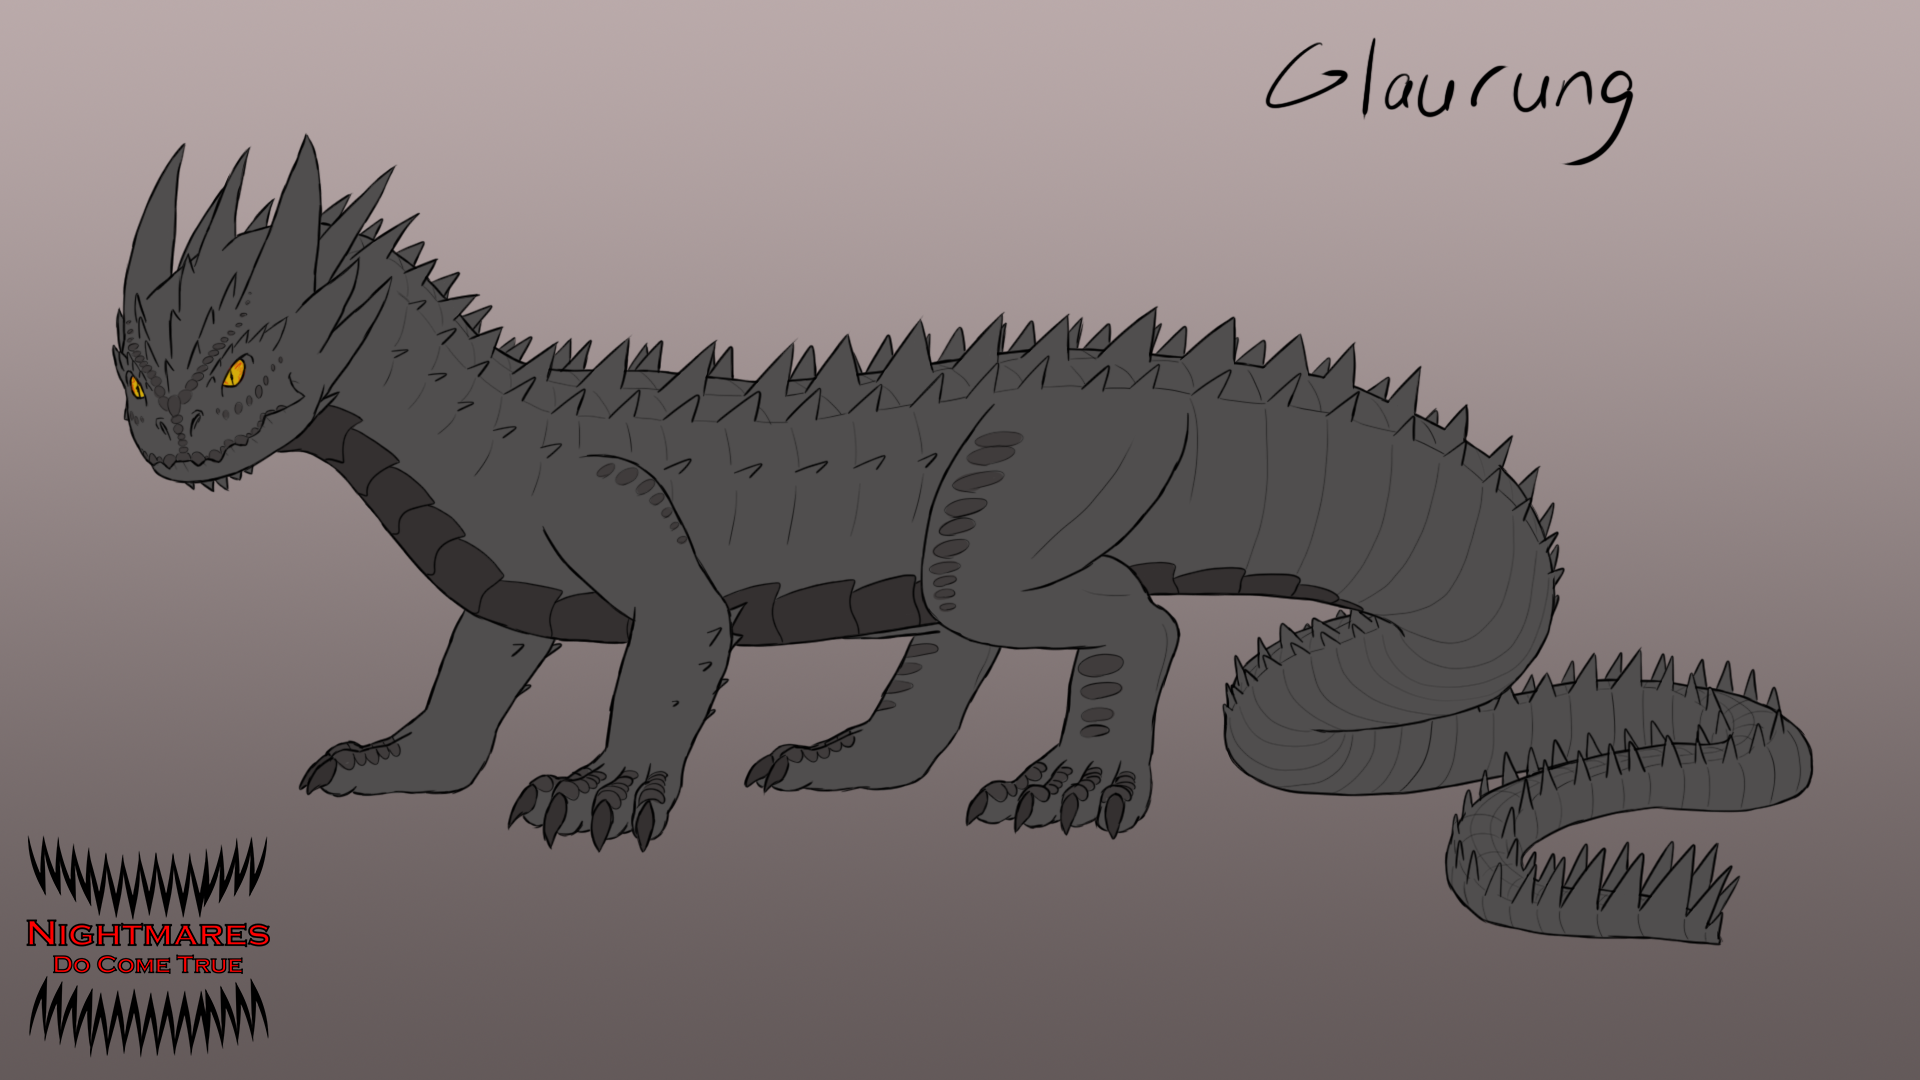 Glaurung, the Father of the Dragons by BrokenMachine86 on DeviantArt